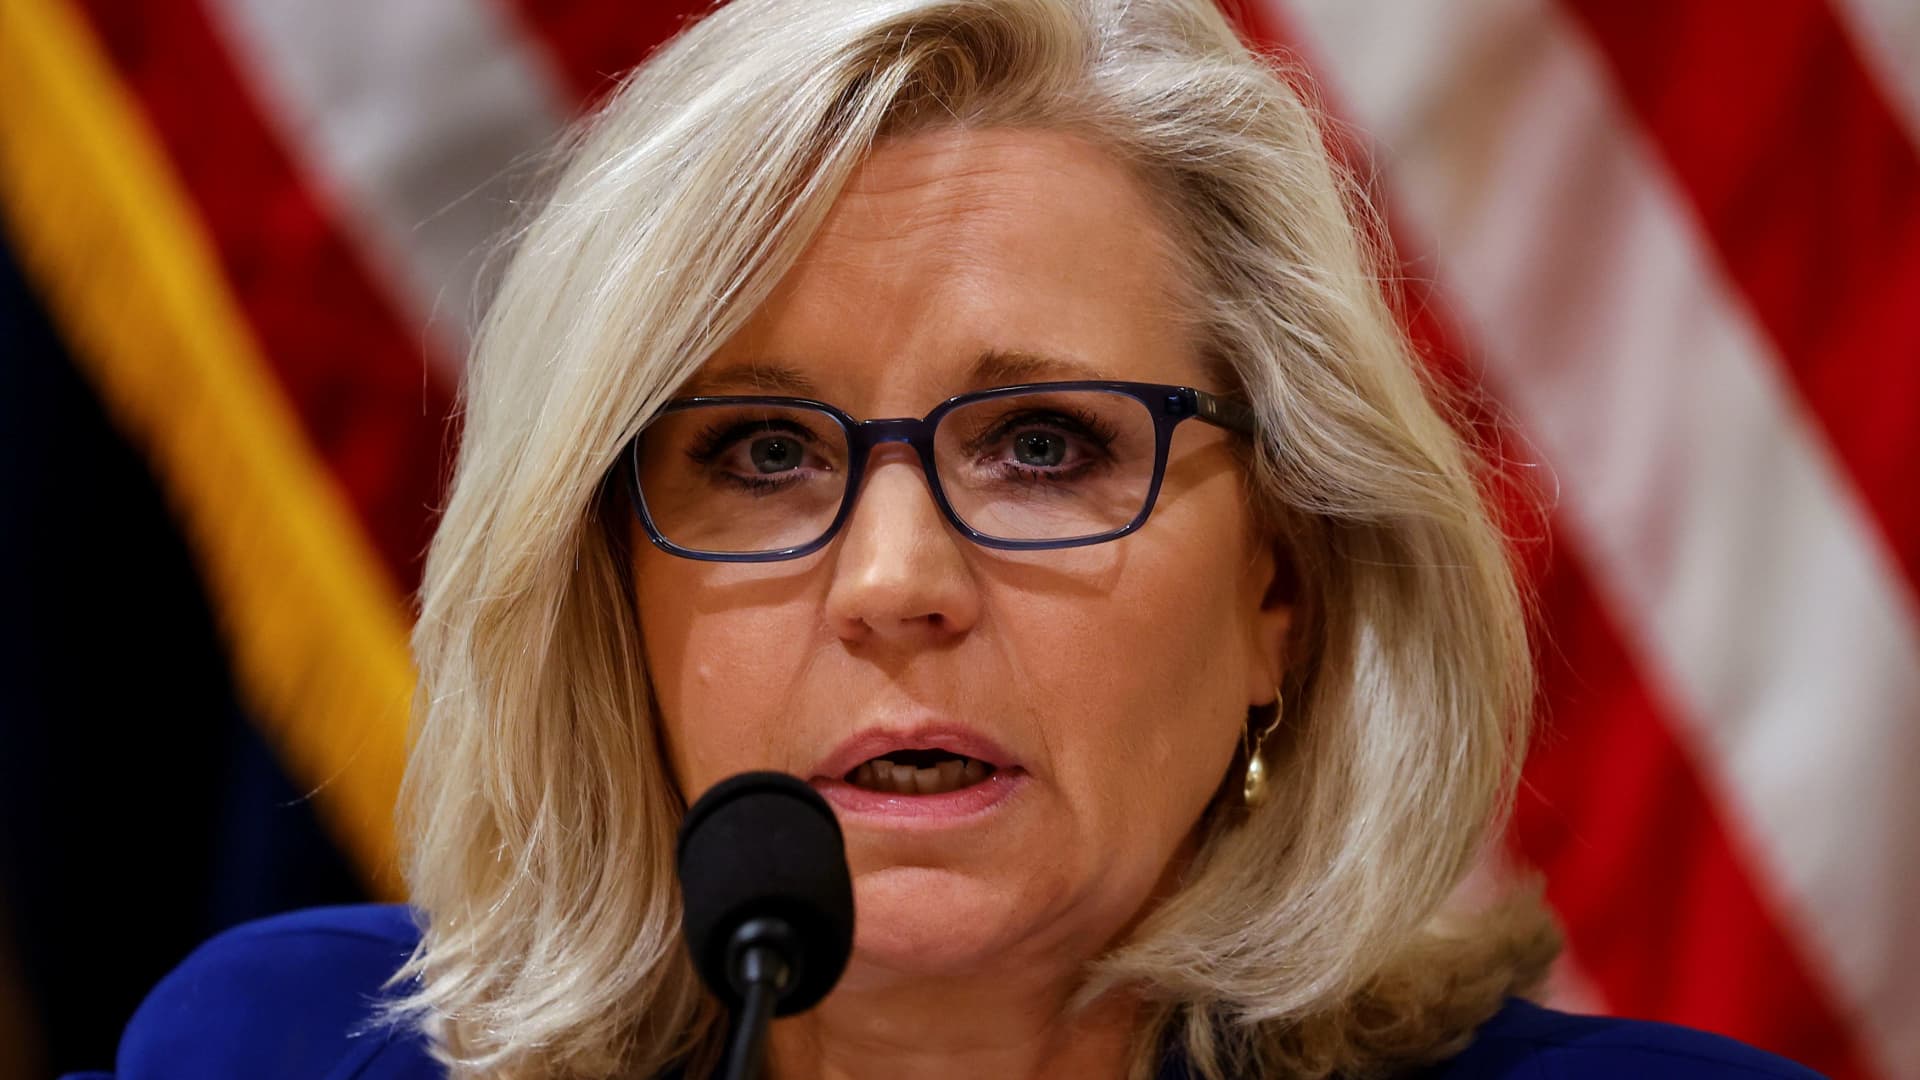 U.S. Representative Liz Cheney (R-WY) listens to testimony from Metropolitan Police Department Officer Daniel Hodges recall how he was assaulted during the January 6 attack on the U.S. Capitol, during the opening hearing of the U.S. House (Select) Committee investigating the attack on Capitol Hill in Washington, U.S., July 27, 2021.